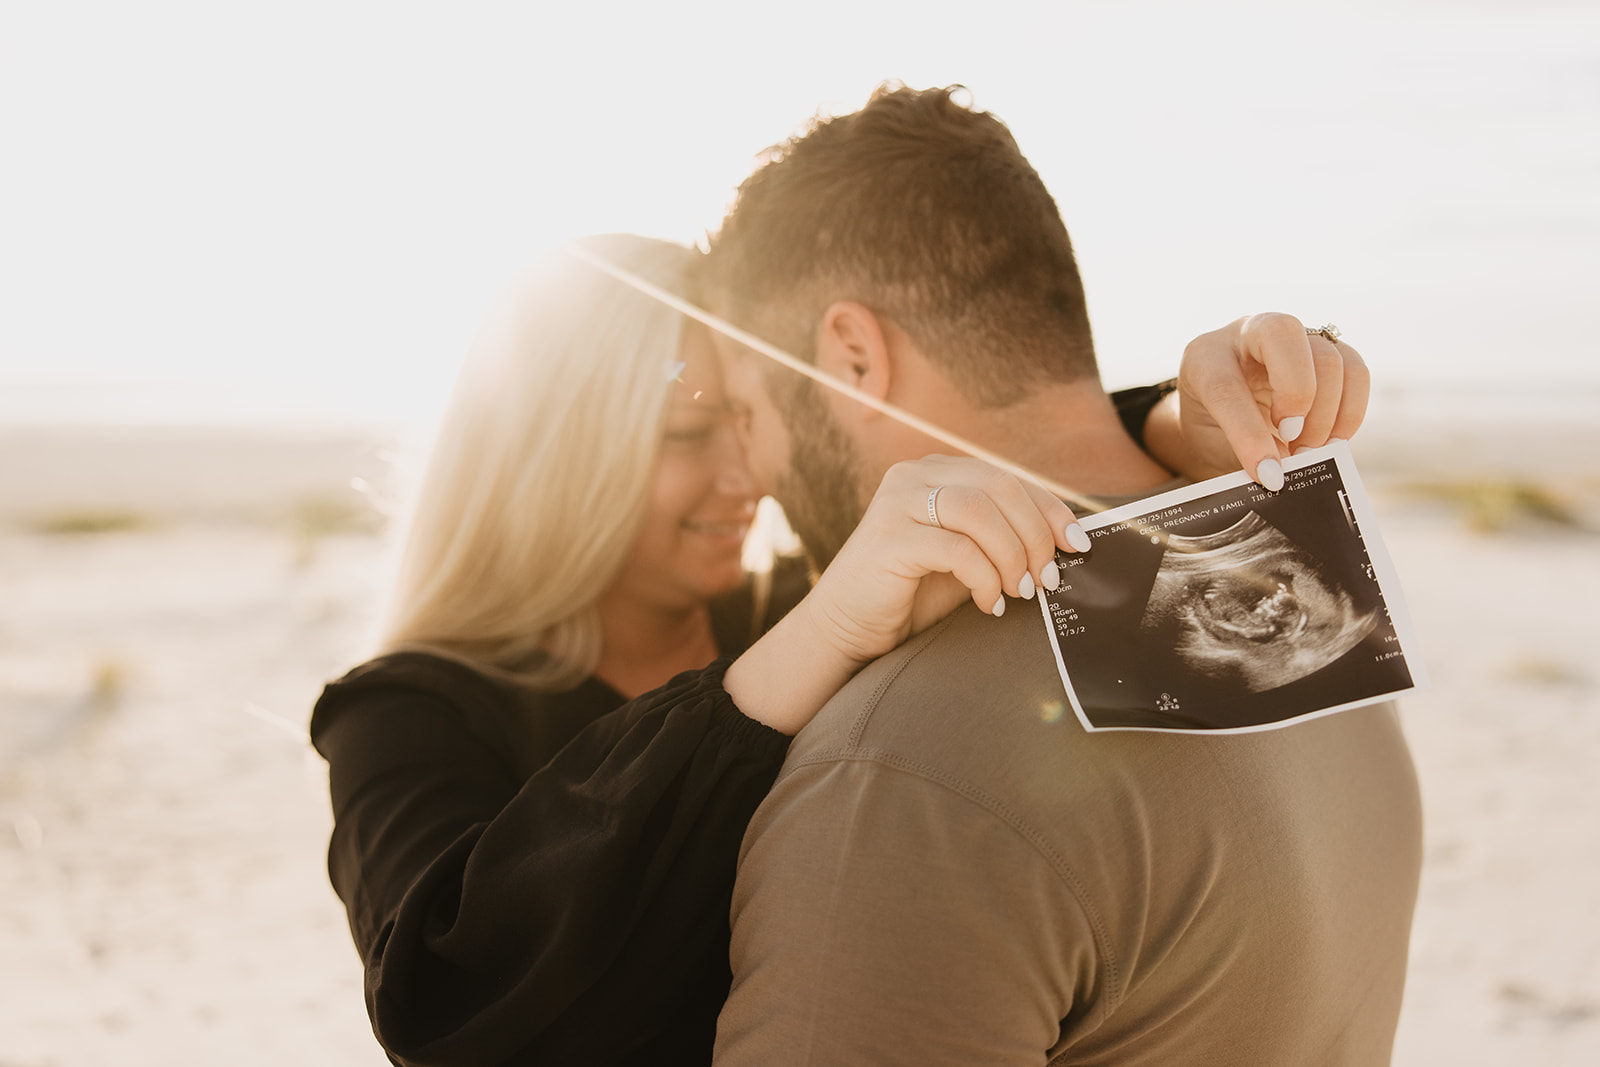 the wife wrapping her arms around the neck of her husband with the baby ultrasound photo